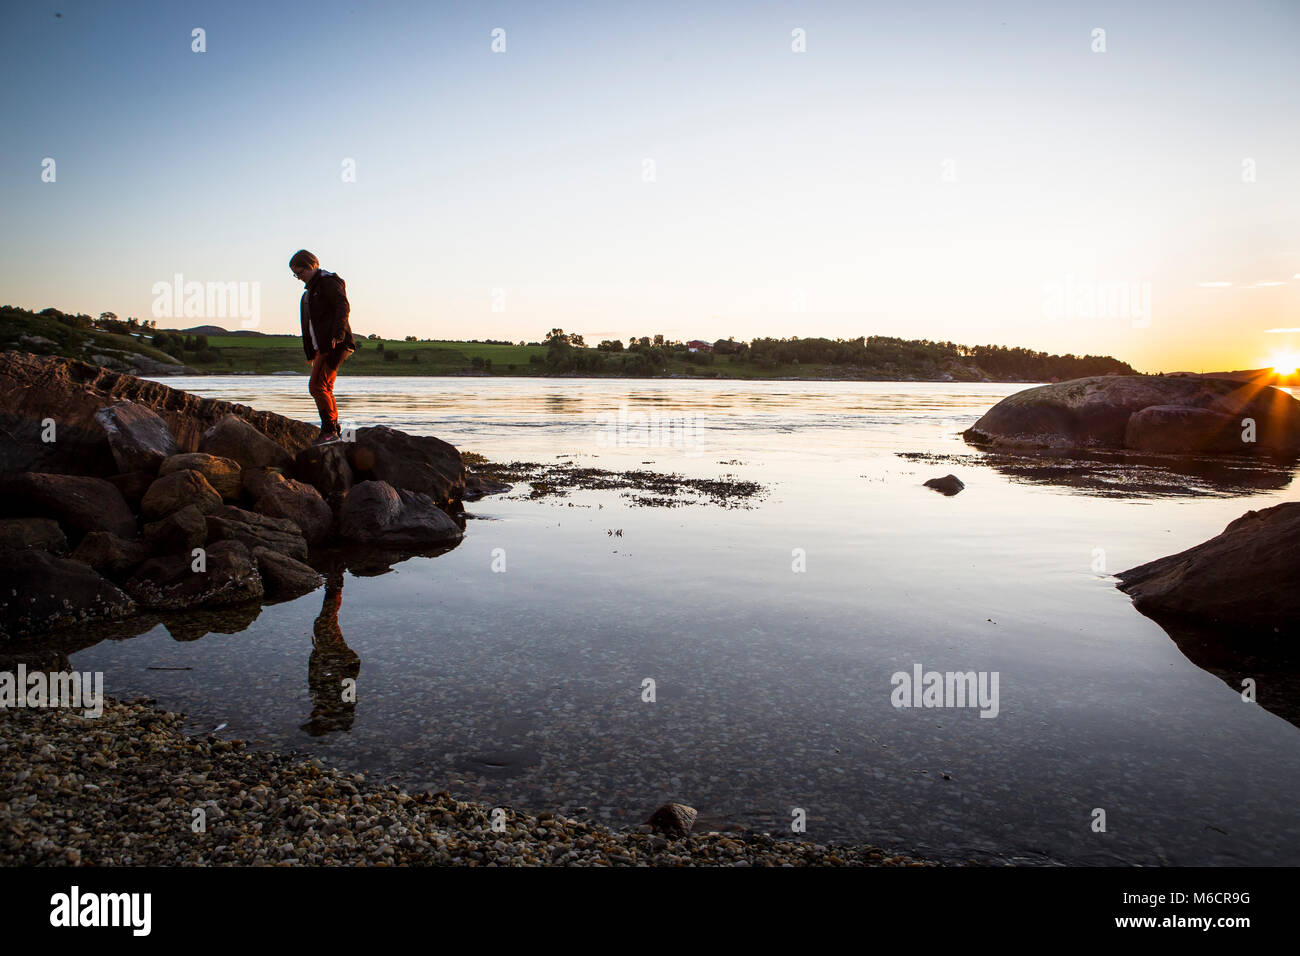 Woman strolling along the shore of a river in sunset. Stock Photo